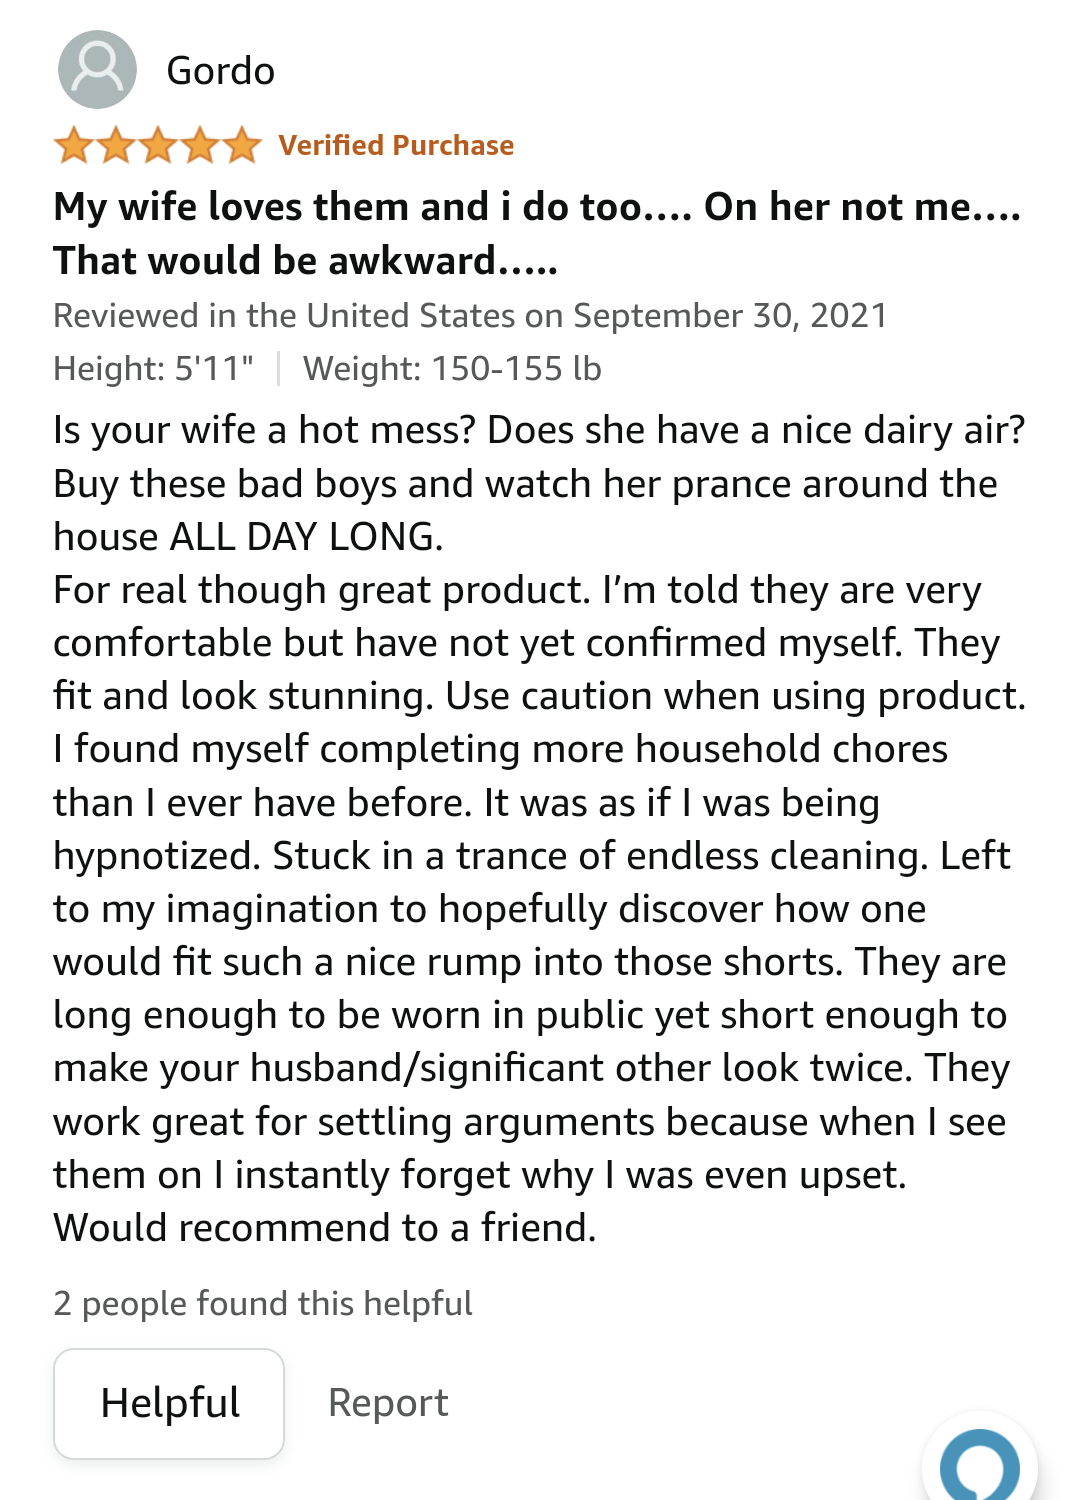 My wife went to buy some shorts online. After reading this review she bought them in a heartbeat.